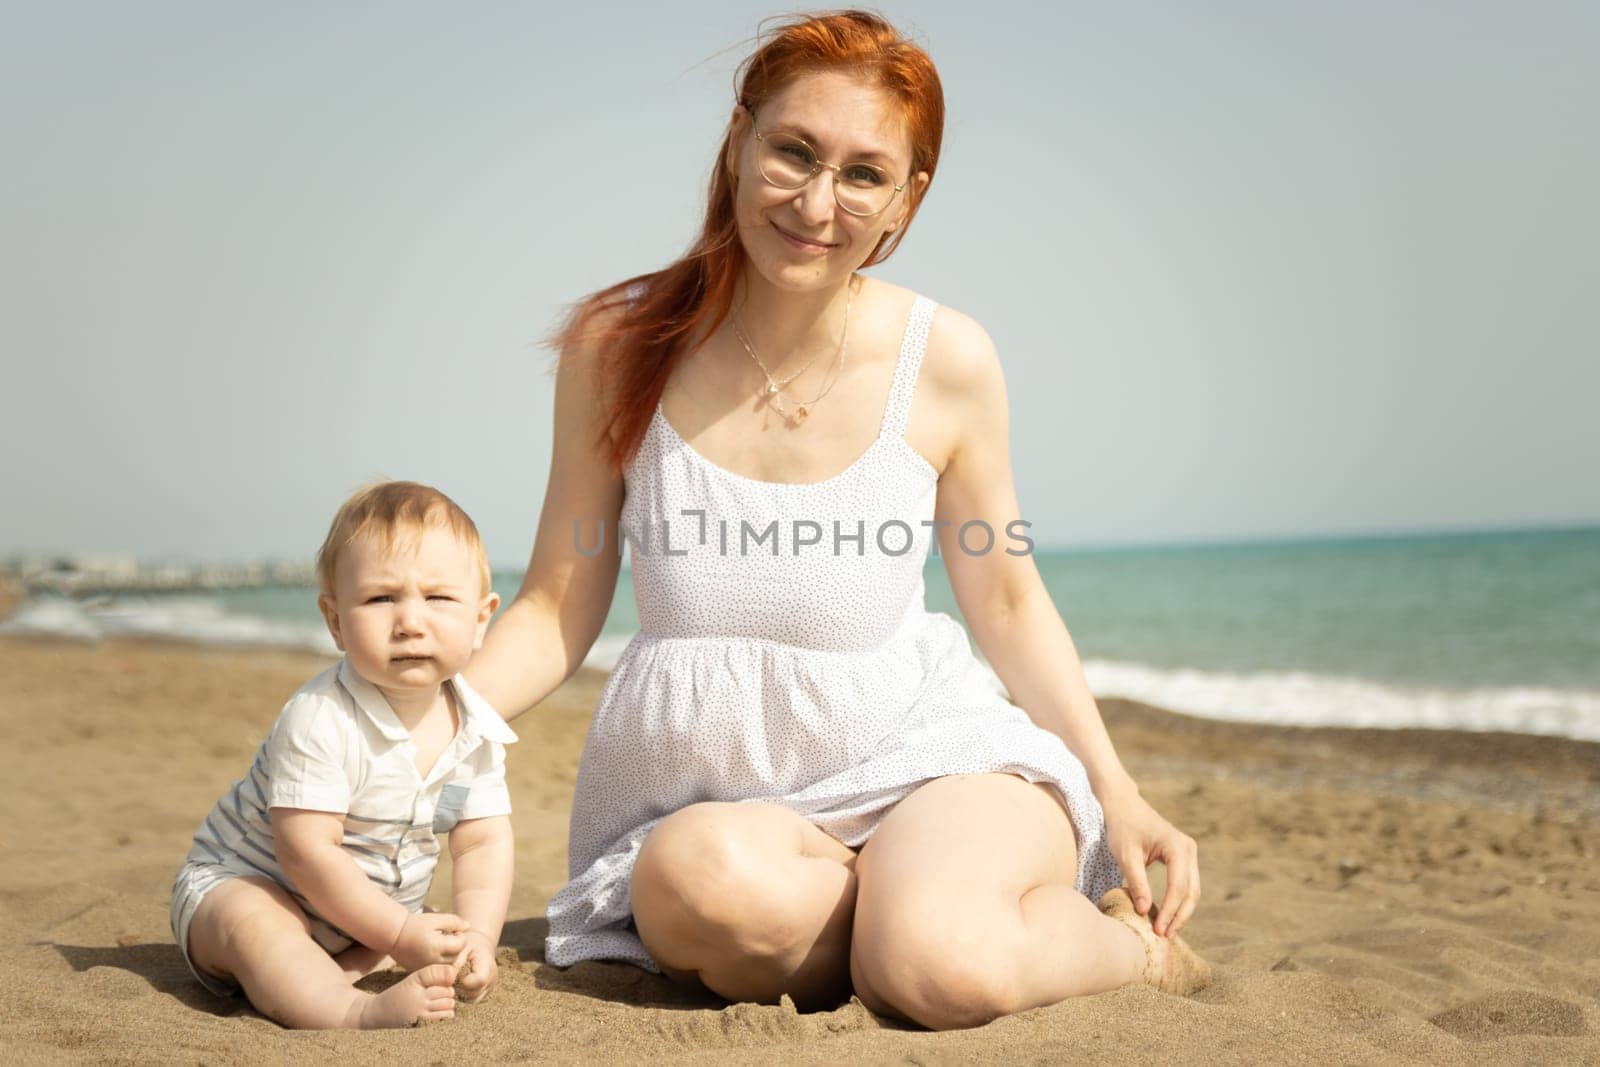 Happy mom with her little baby son on the sand beach. Mid shot